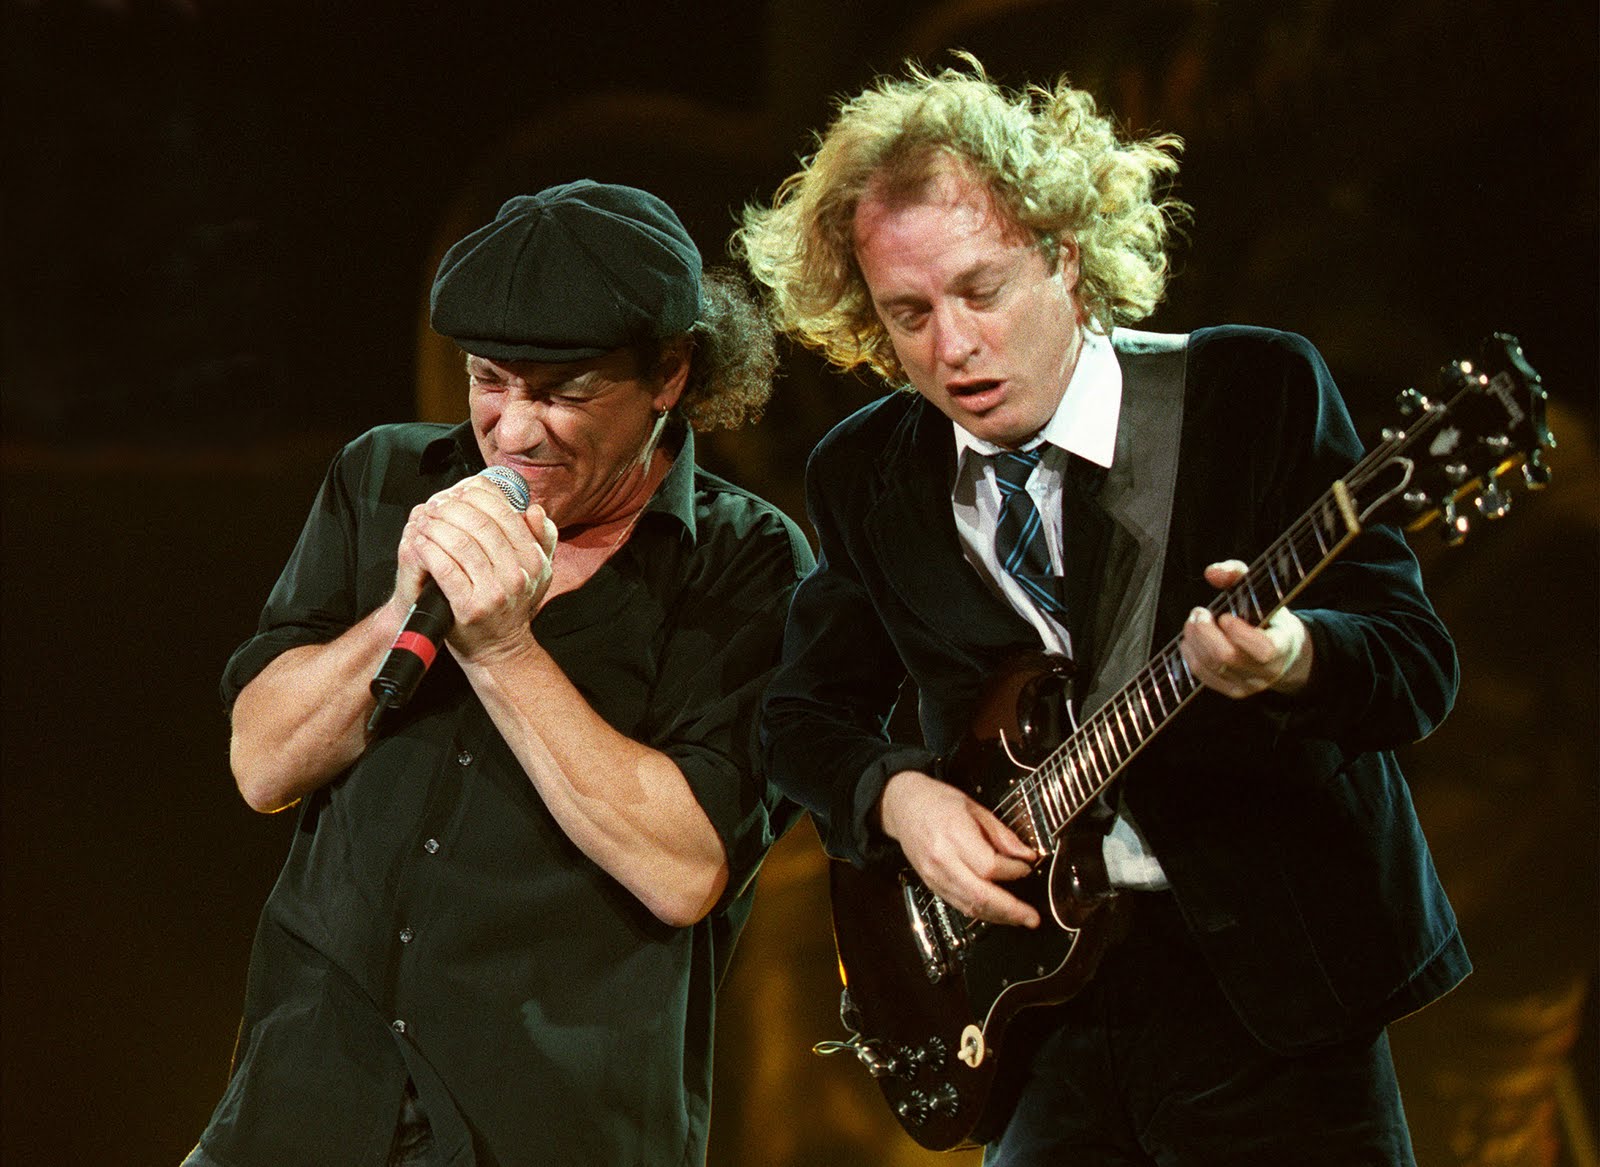 angus young wallpaper,music,musician,string instrument,musical instrument,performance